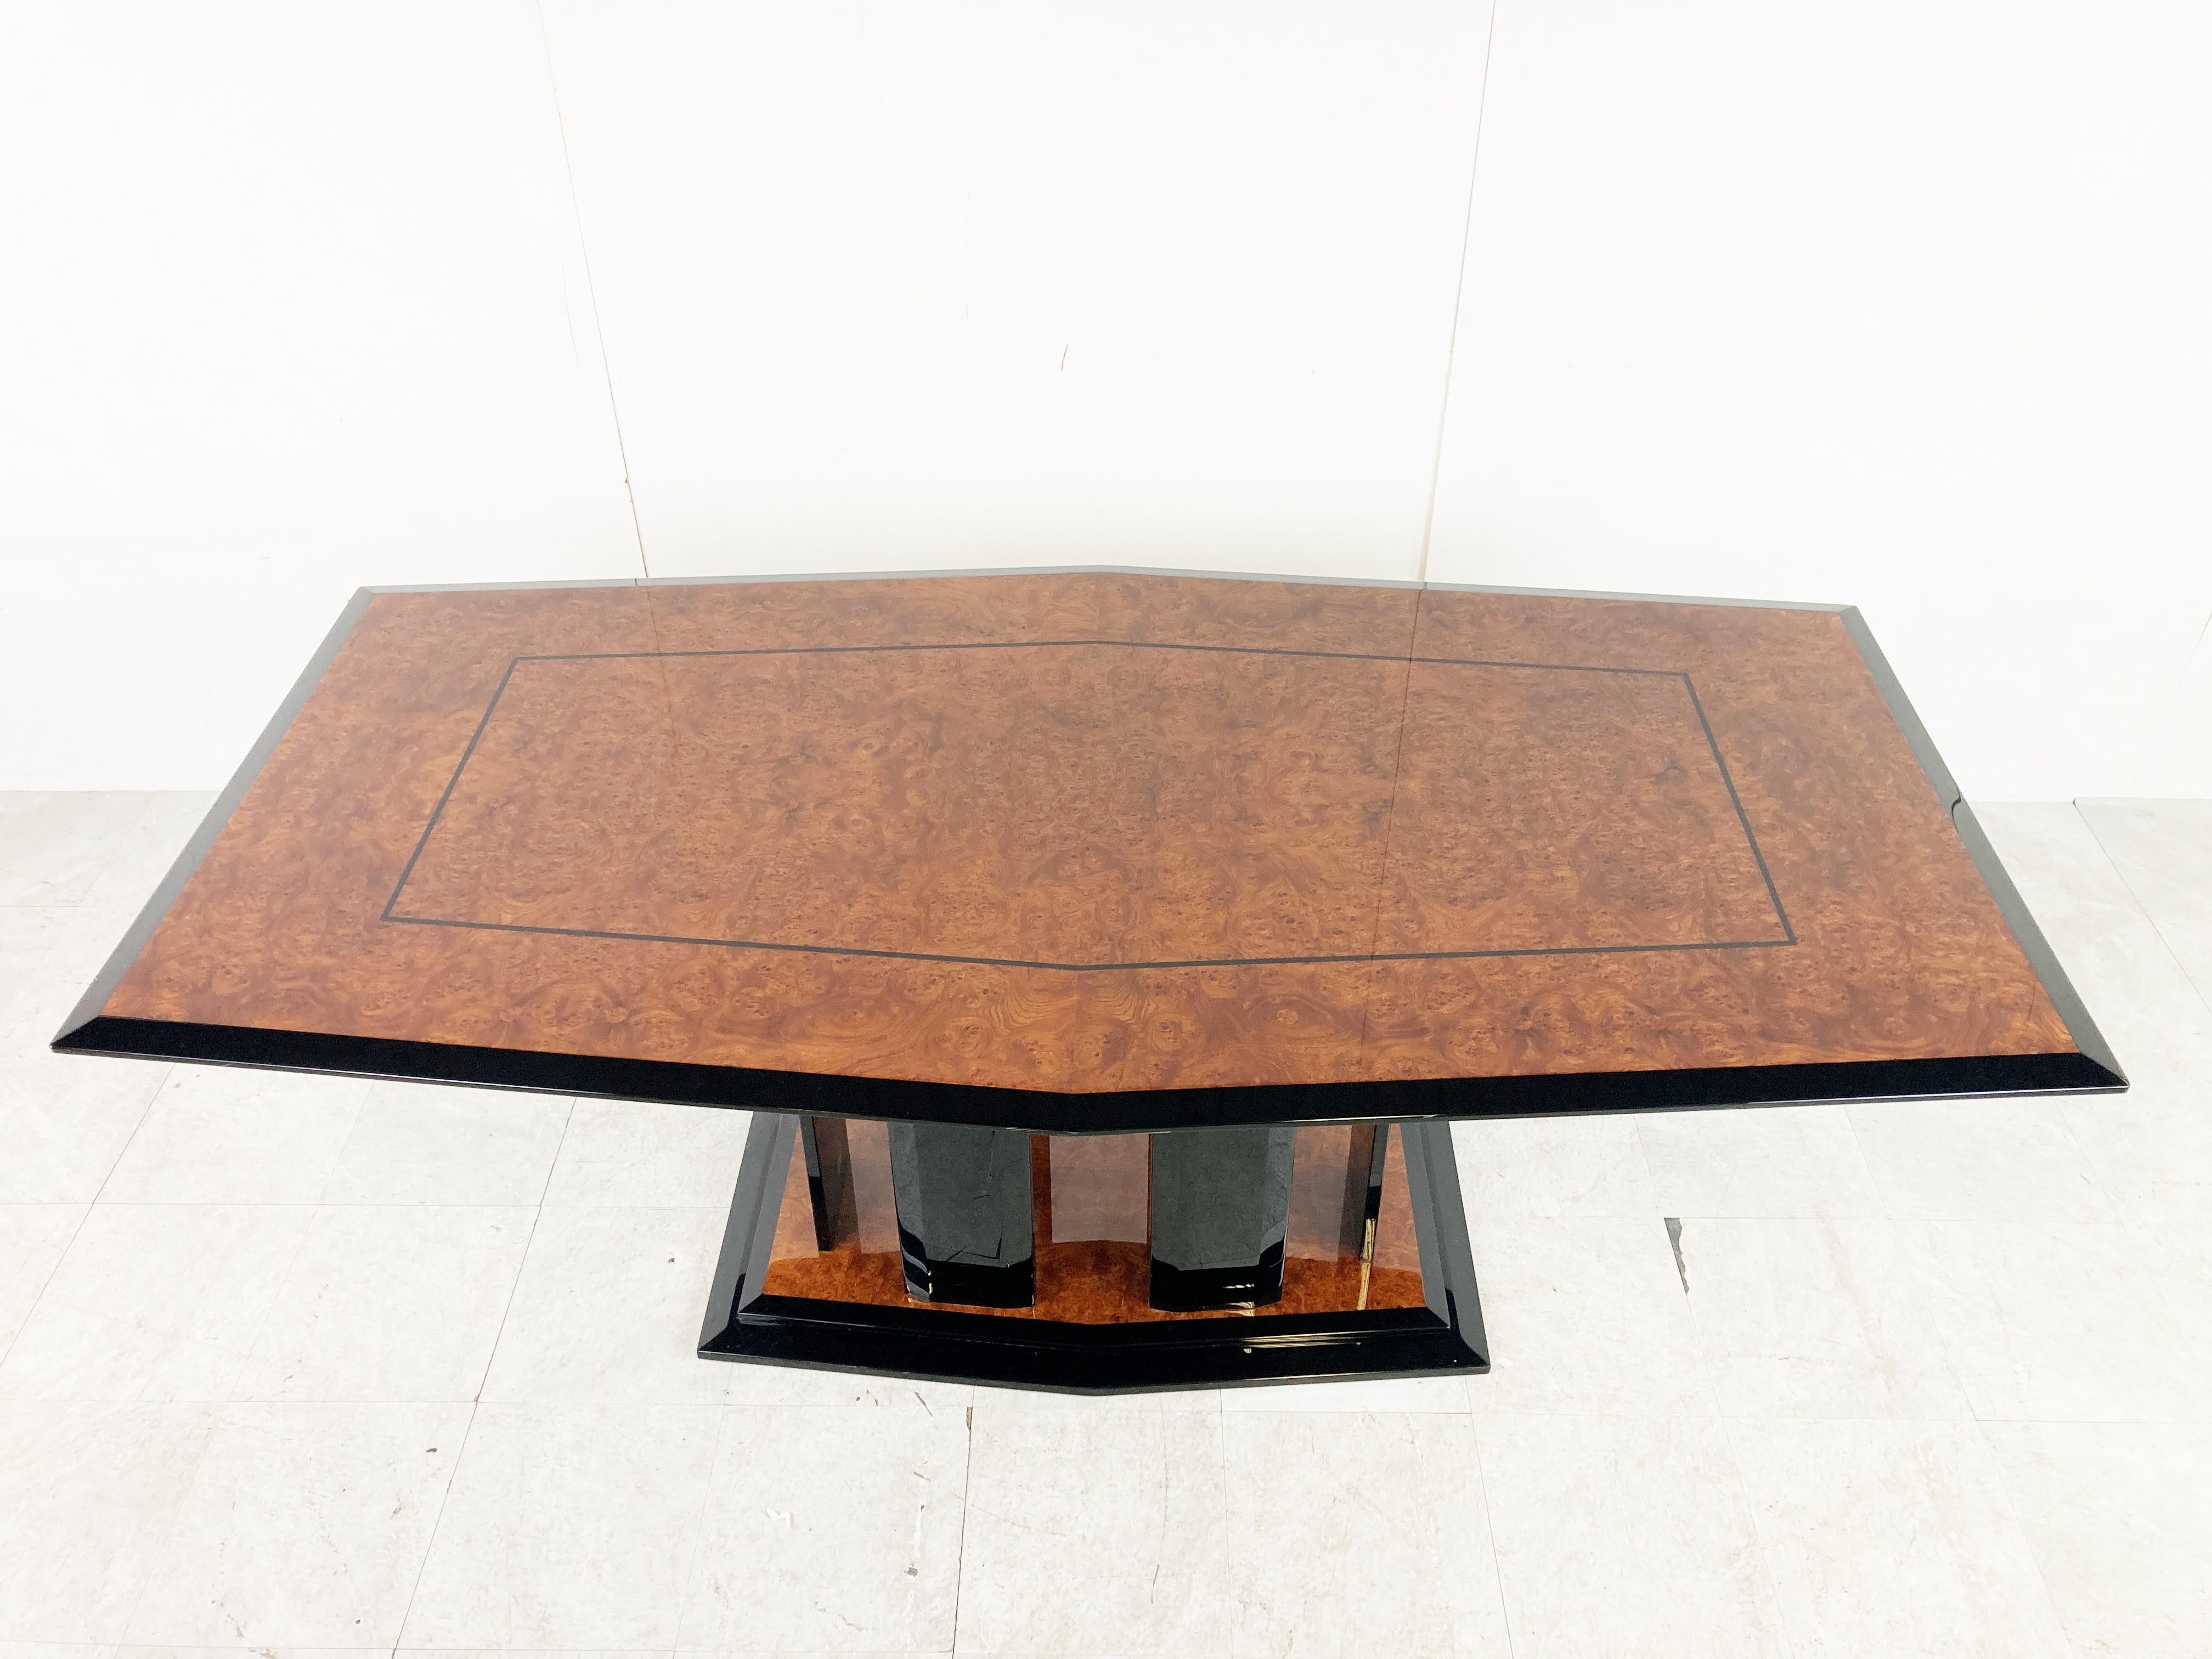 Vintage extendable dining table by Paul Michel.

Beautiful burl wood panels with beautiful veining and black lacquer extensions pieces and base.

The table can be used with or without the lacquered wooden extended plates.

1980s -